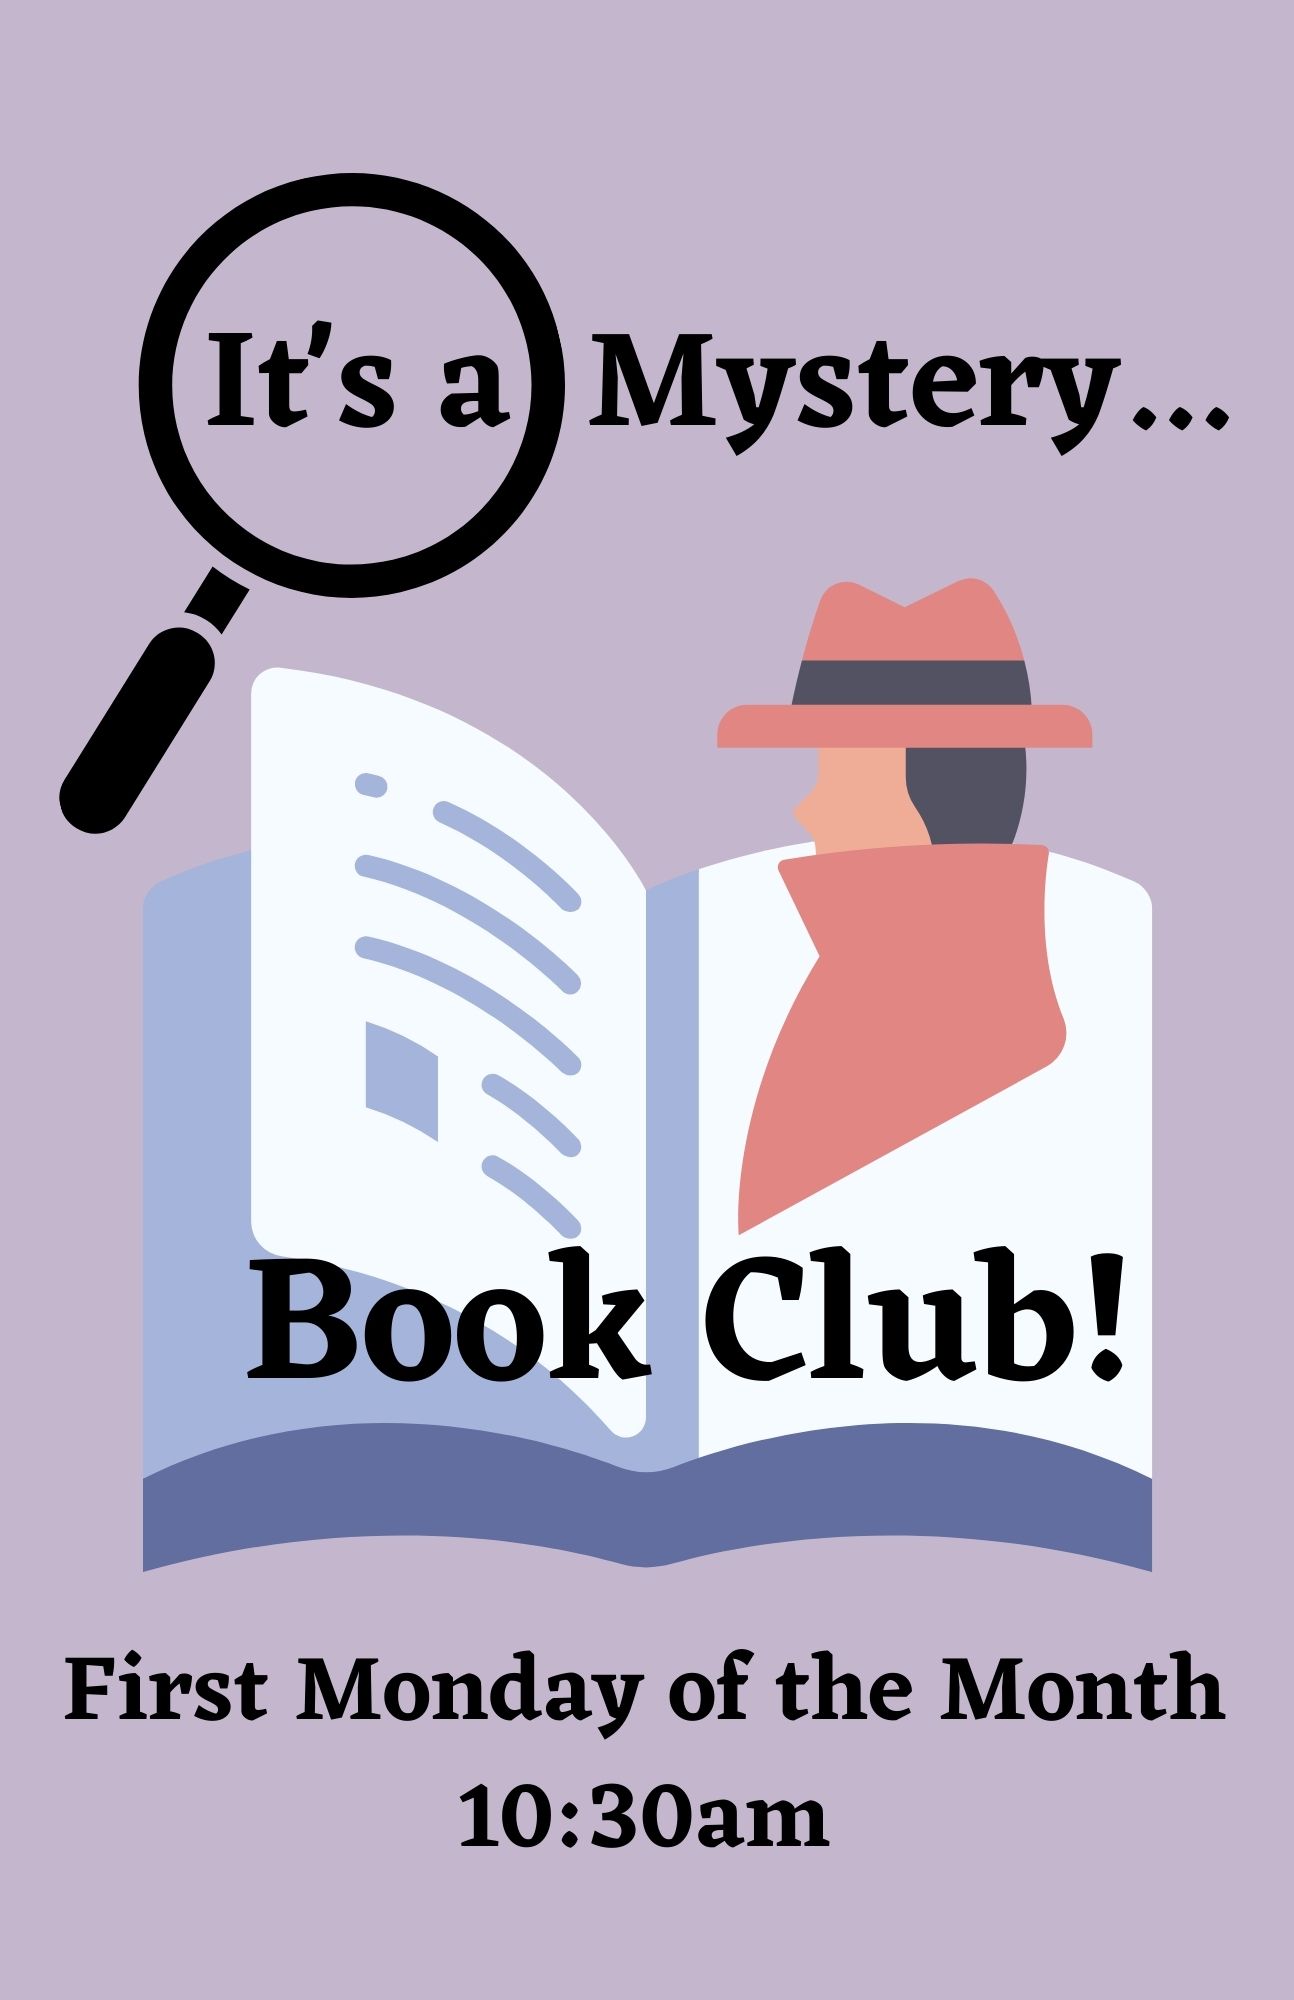 It's a mystery book club! Images of a detective with magnifying glass and book.